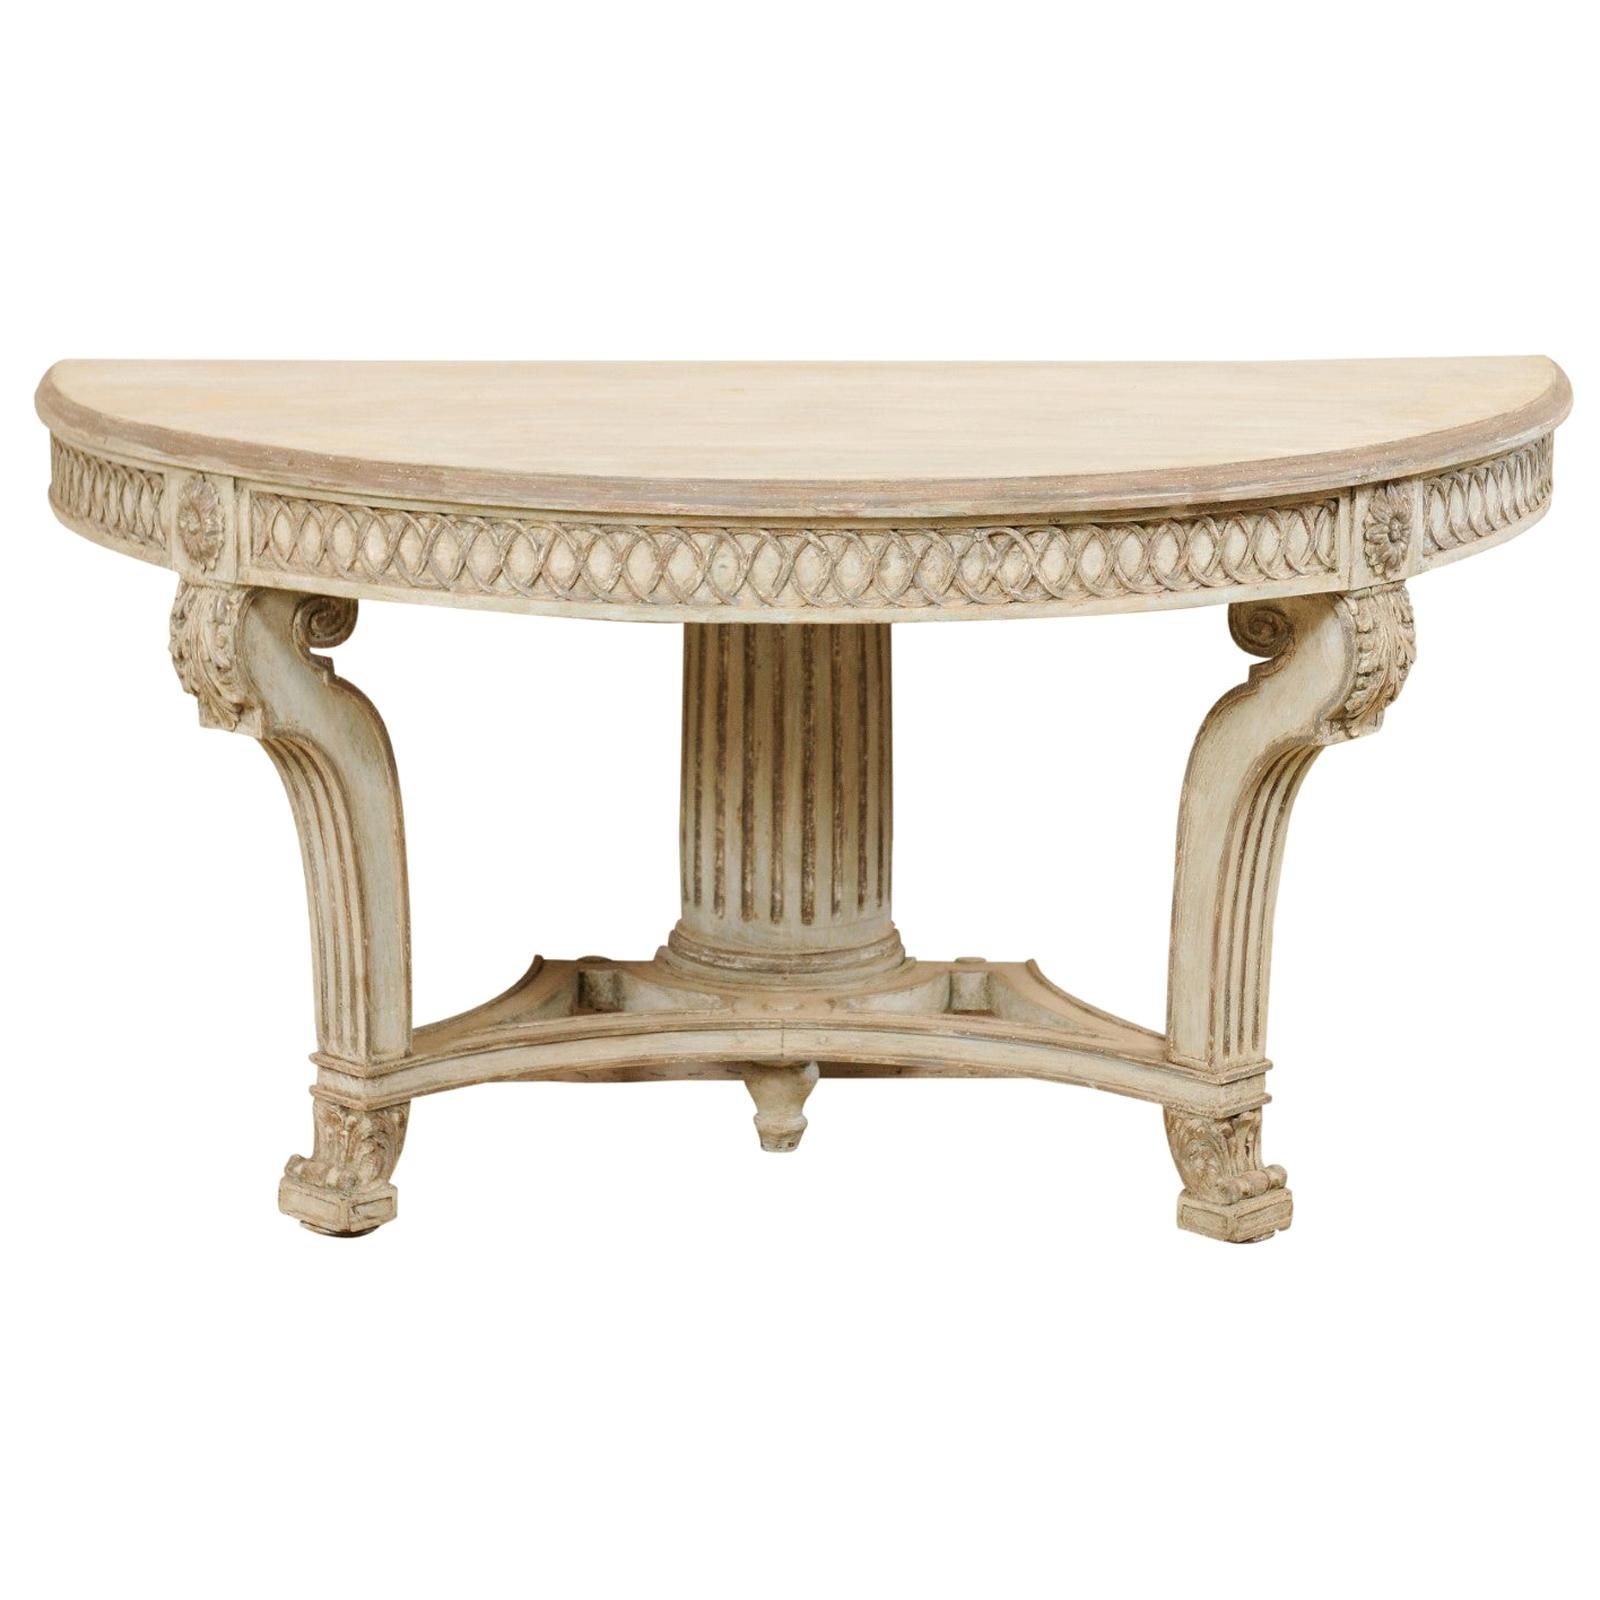 Italian Half-Round Nicely Carved Console Table from the Mid-20th Century For Sale